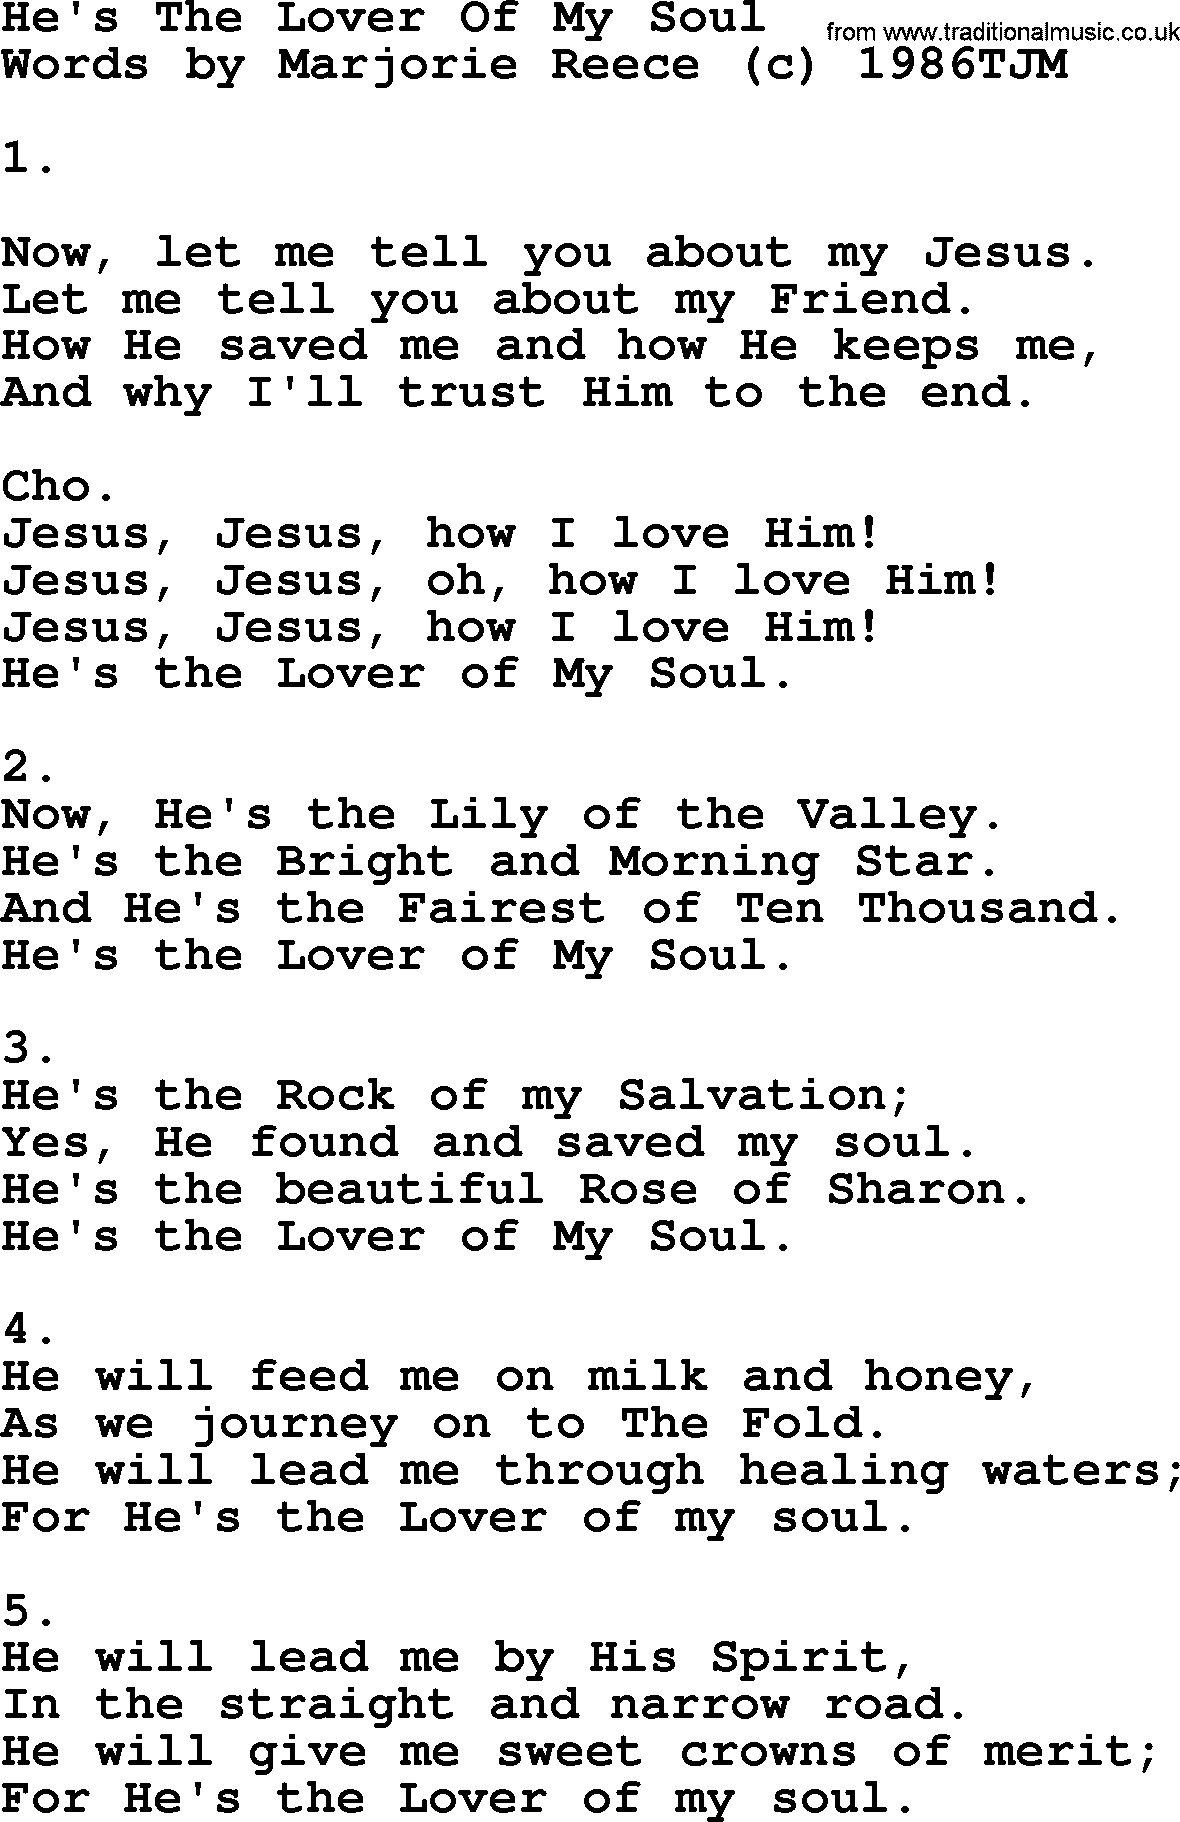 Apostolic & Pentecostal Hymns and Songs, Hymn: He's The Lover Of My Soul lyrics and PDF